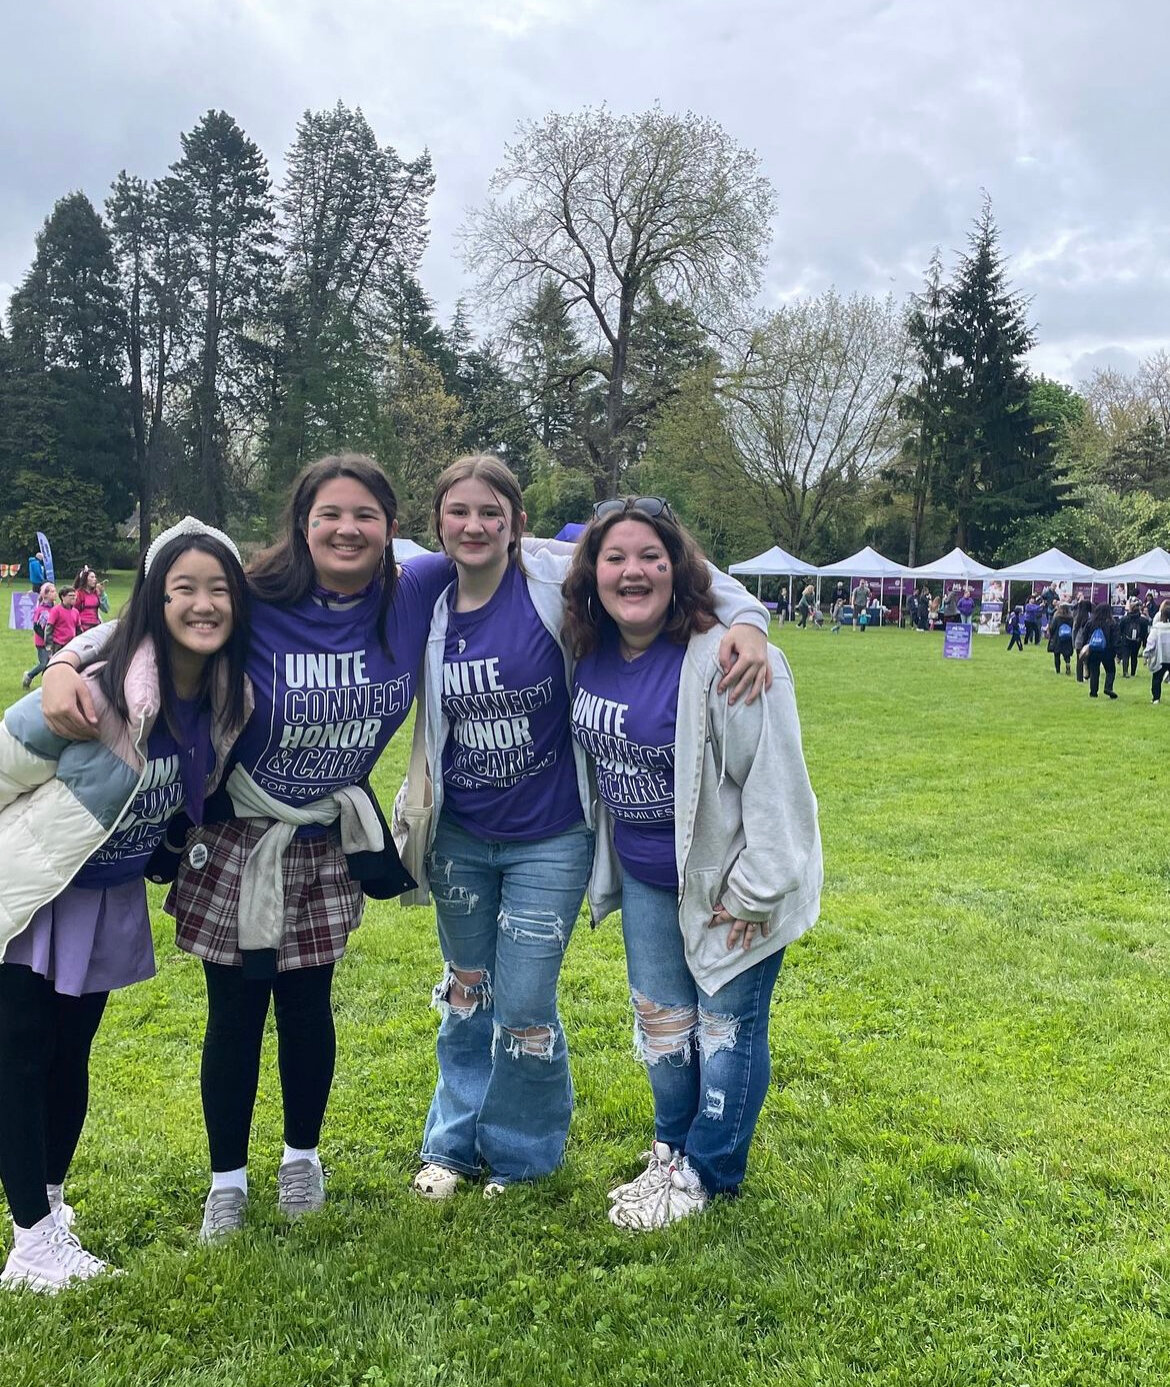 Tiffany Lam, Madison Murphy, Margaret Metzger, Nnyl Darby-Palmer. Palmer and Lam brought in an additional $700 in donations on the day of the March. MOD Walk at Woodland Park Zoo.